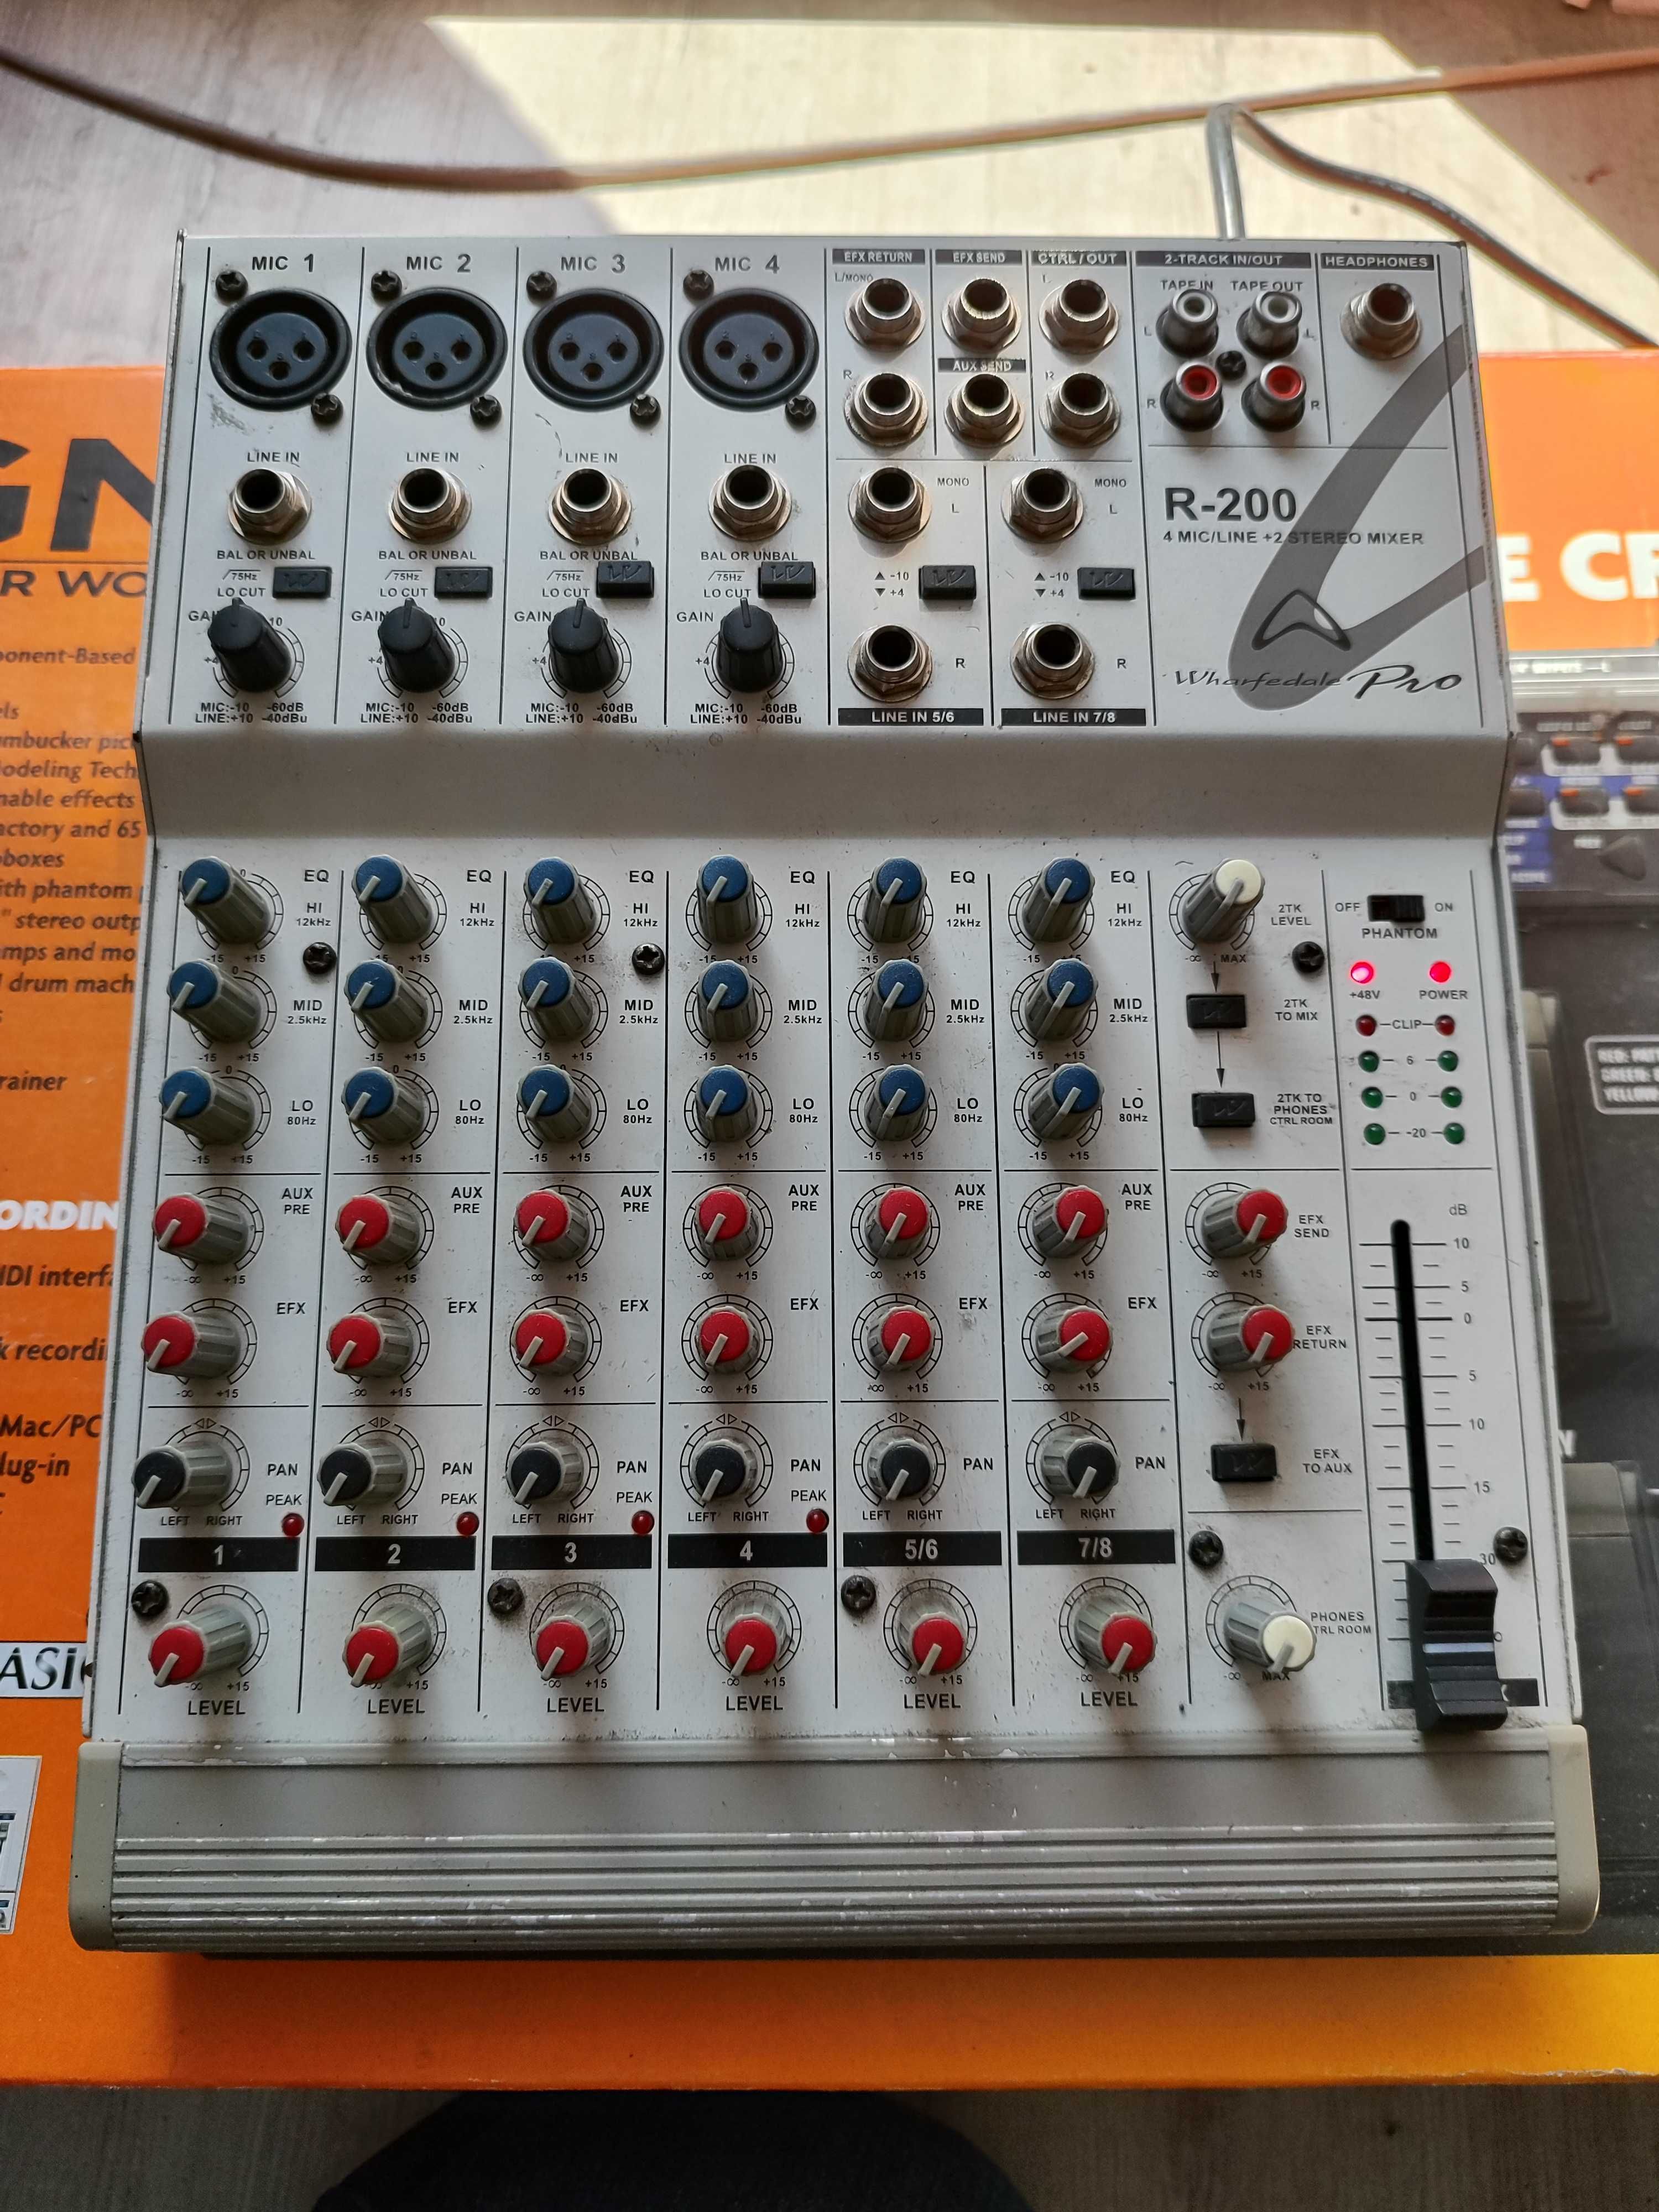 Mixer Wharfedale pro r-200